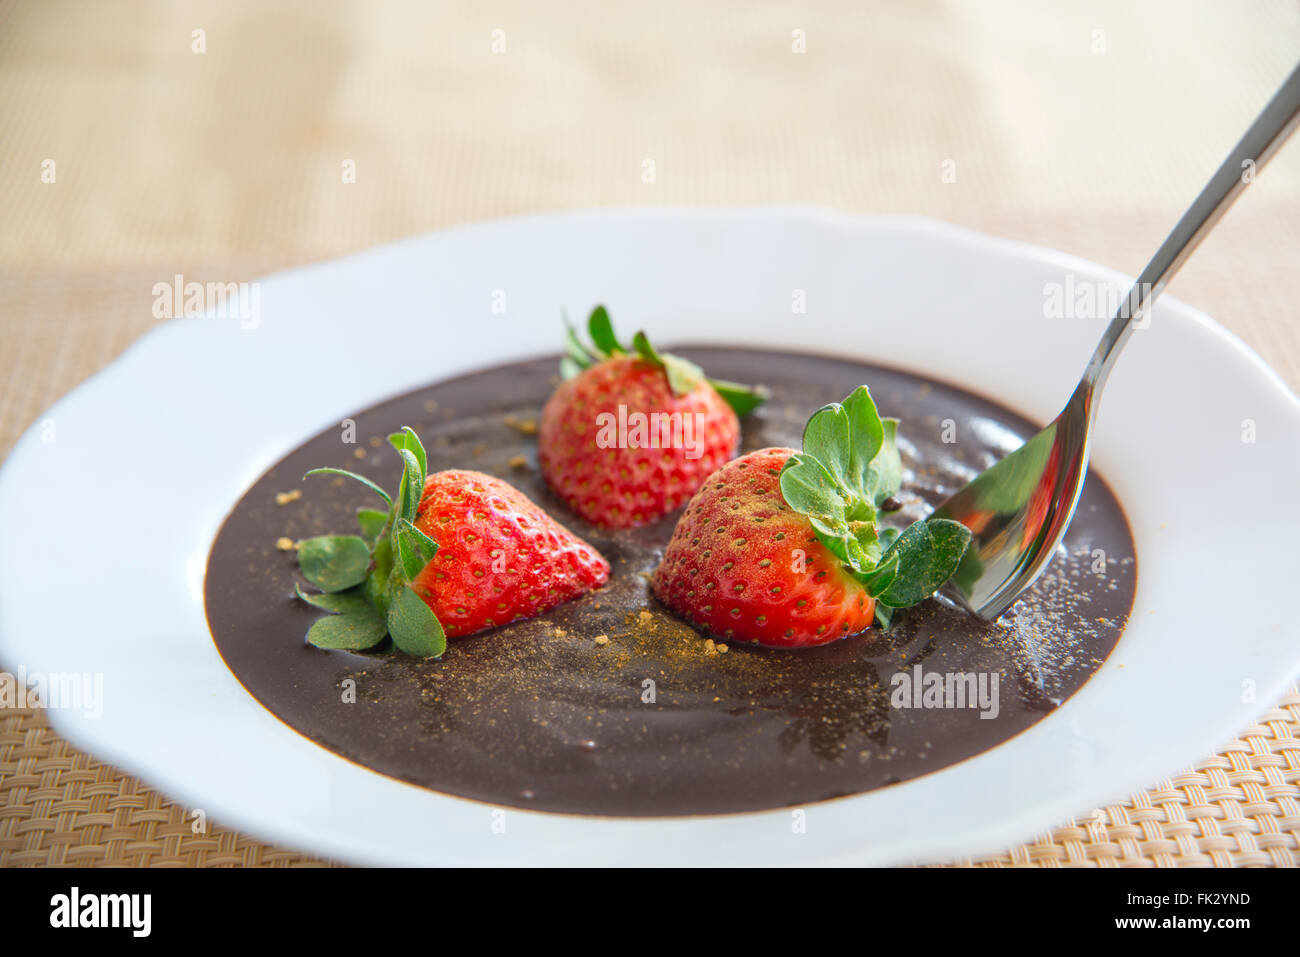 Chocolate cream with strawberries and ginger. Close view. Stock Photo